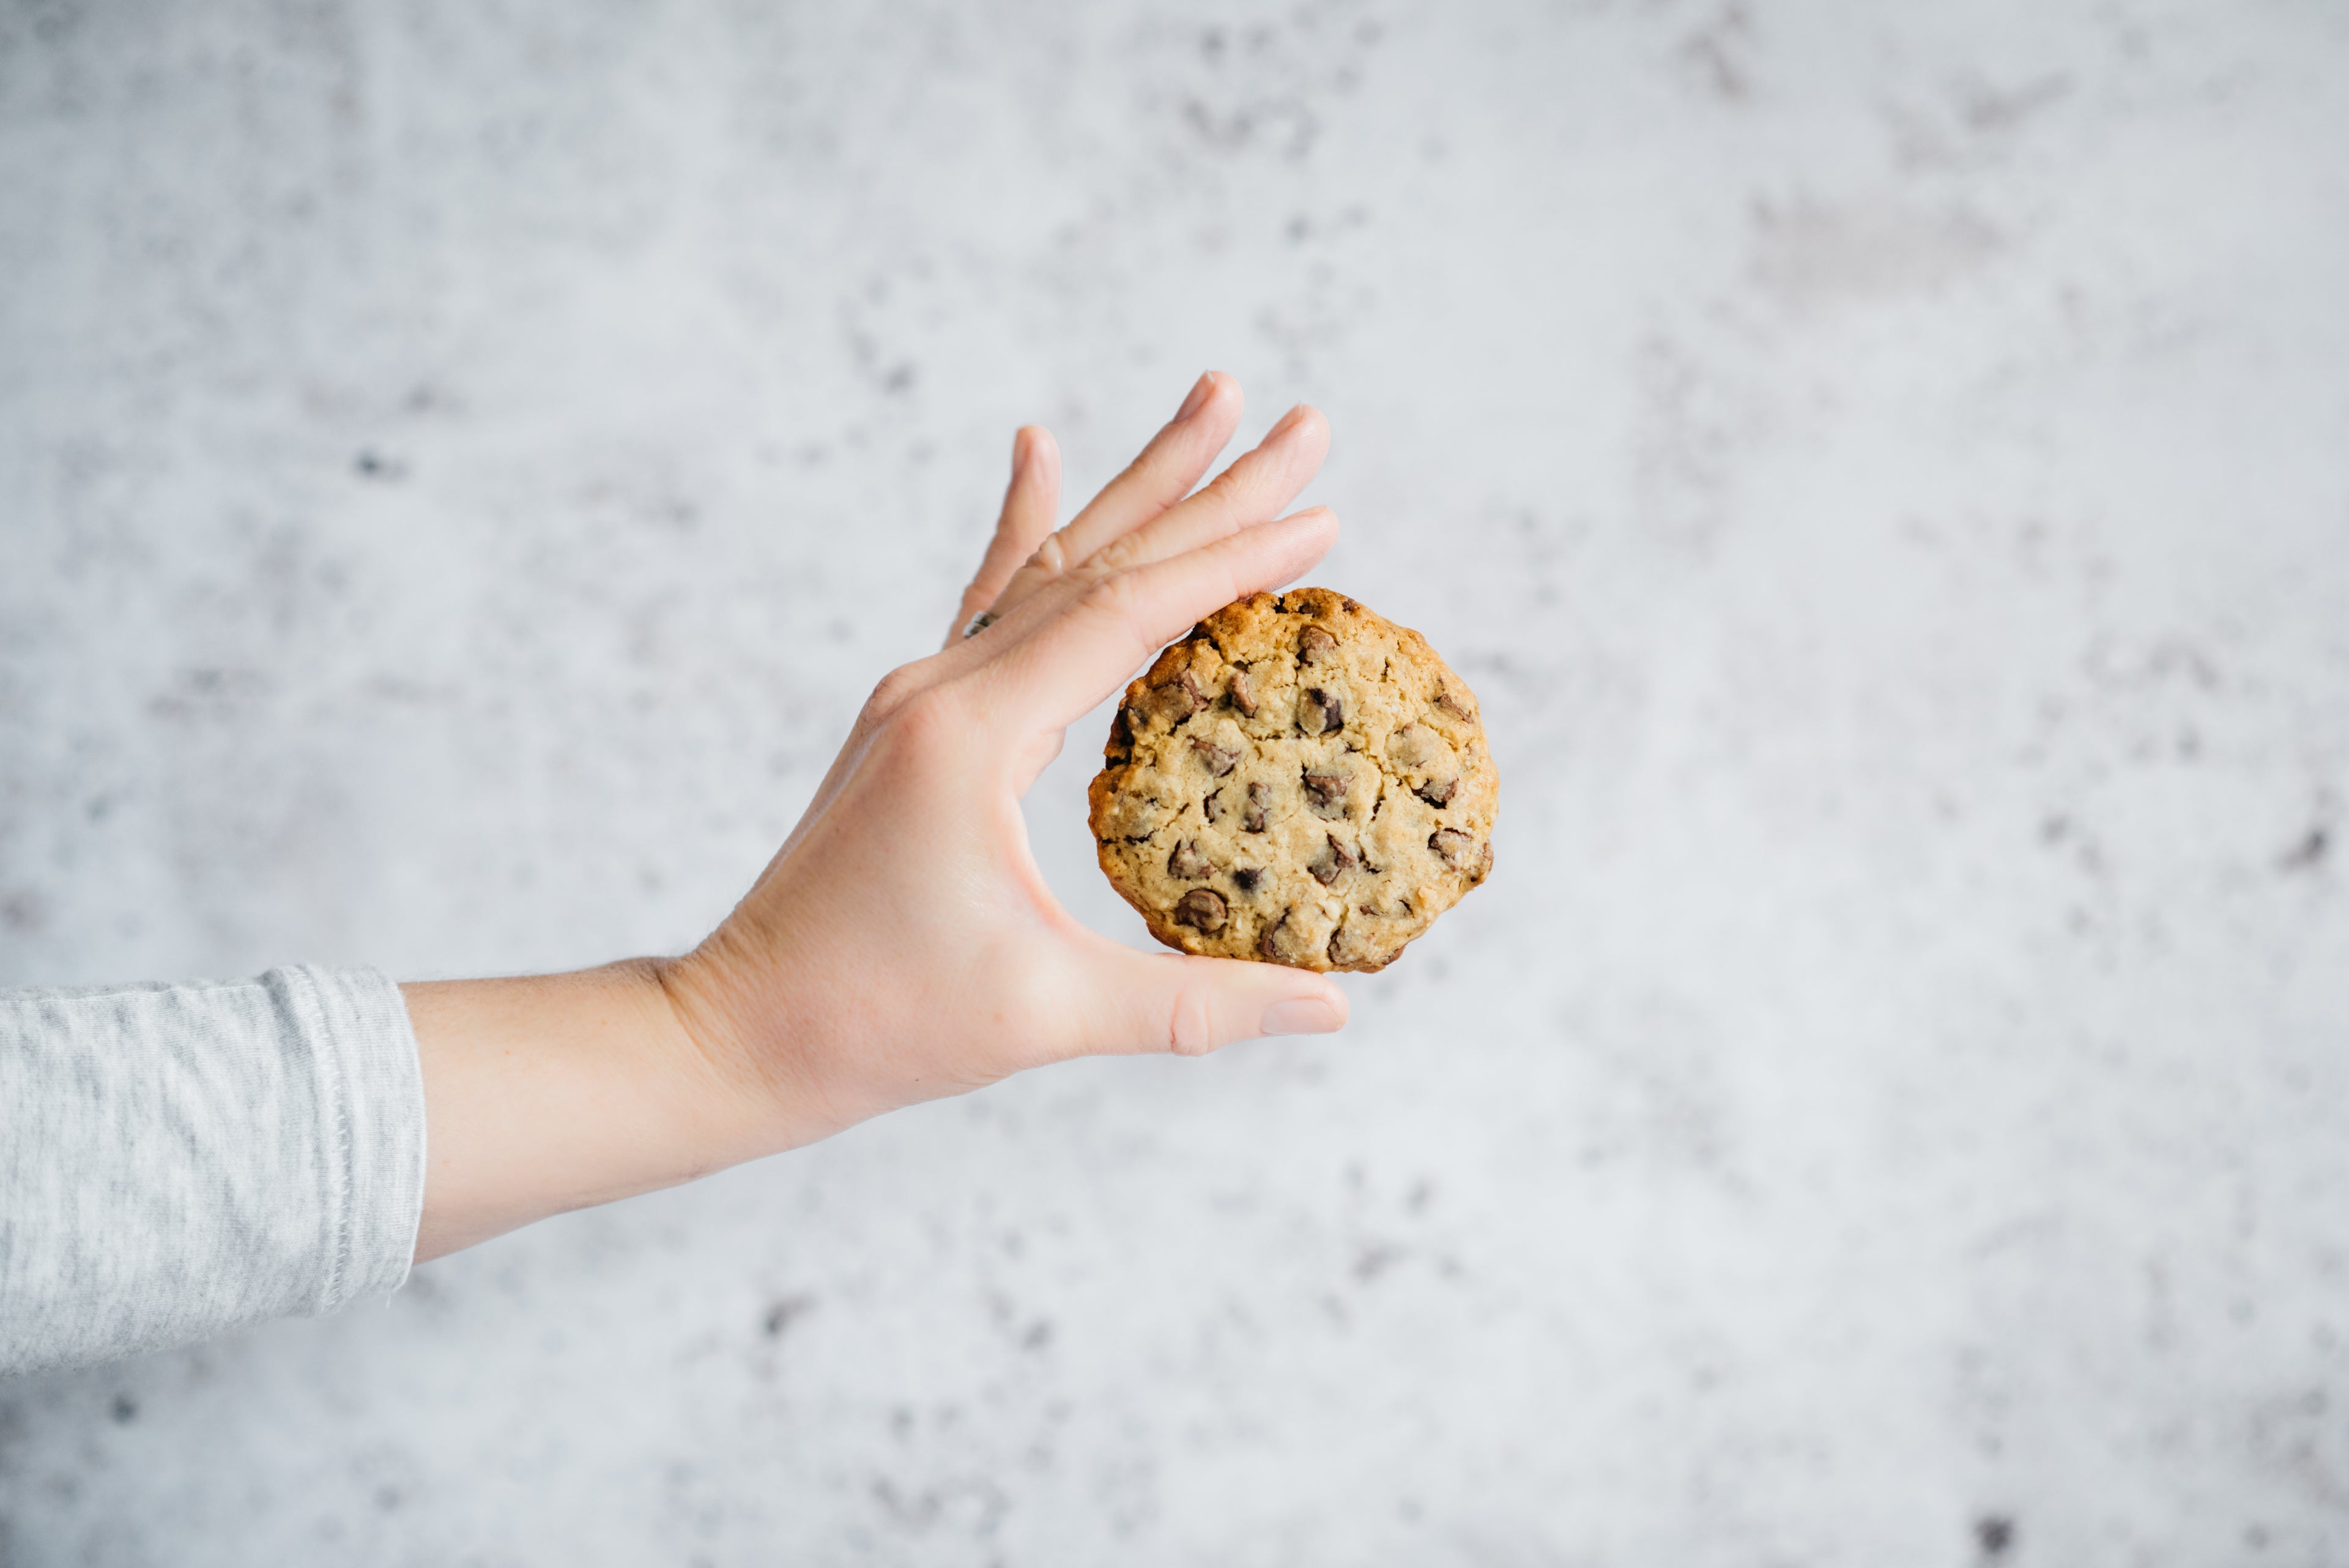 A hand holding a low sugar chocolate chip cookie